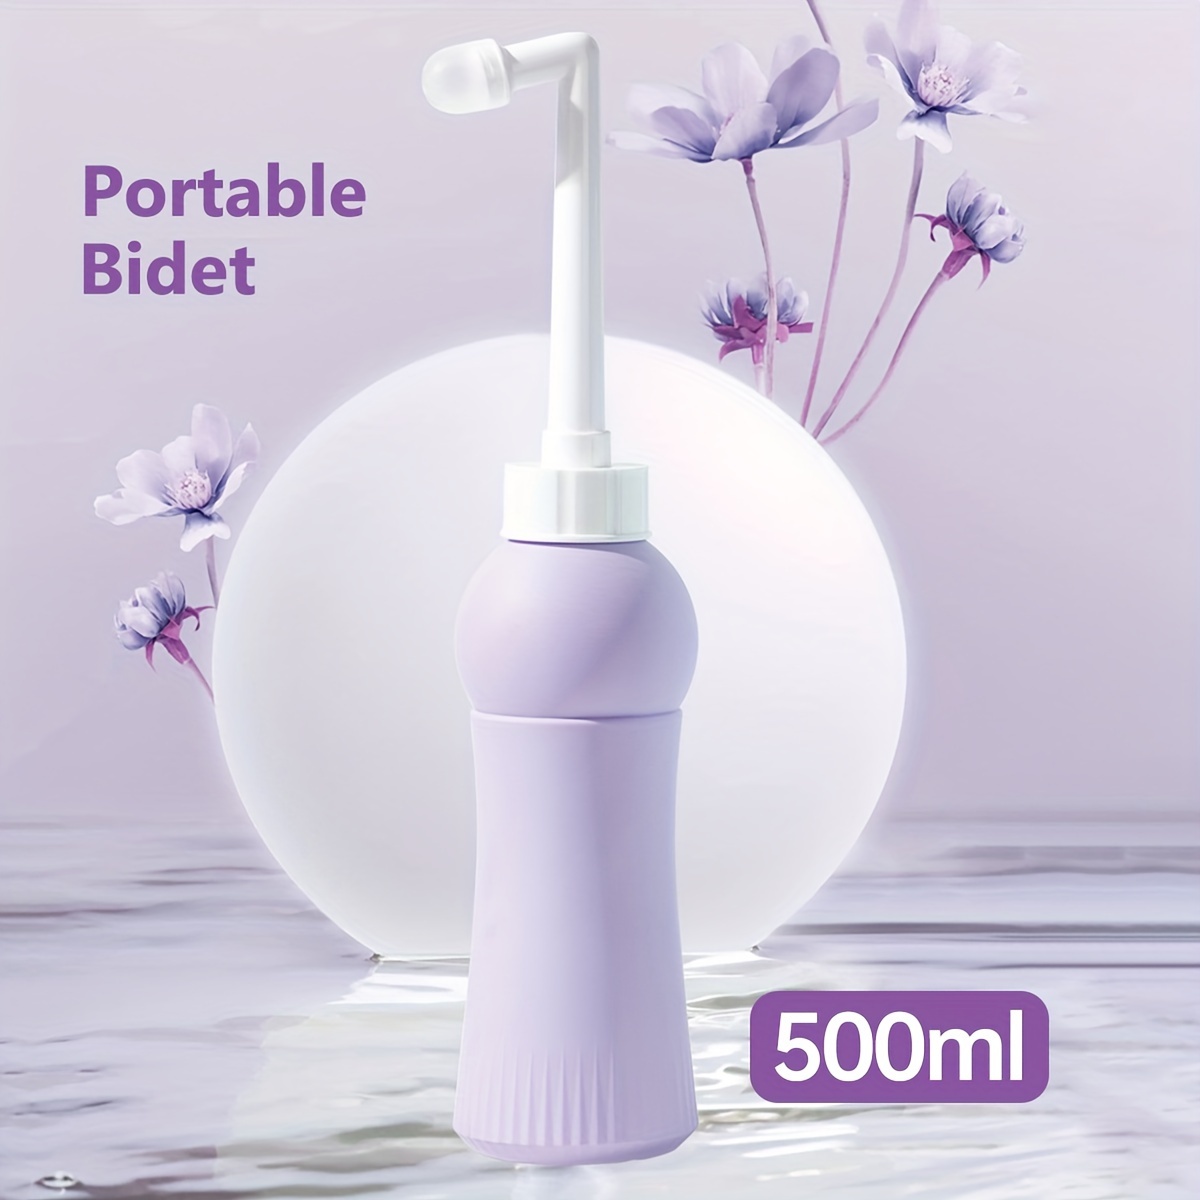 

1pc Large Capacity 500ml Portable Bidet, Handheld Travel Bidet, Reusable Irrigator, Cleaning Device, For Women's Hygienic Cleaning, Suitable For Outdoor And Travel Use